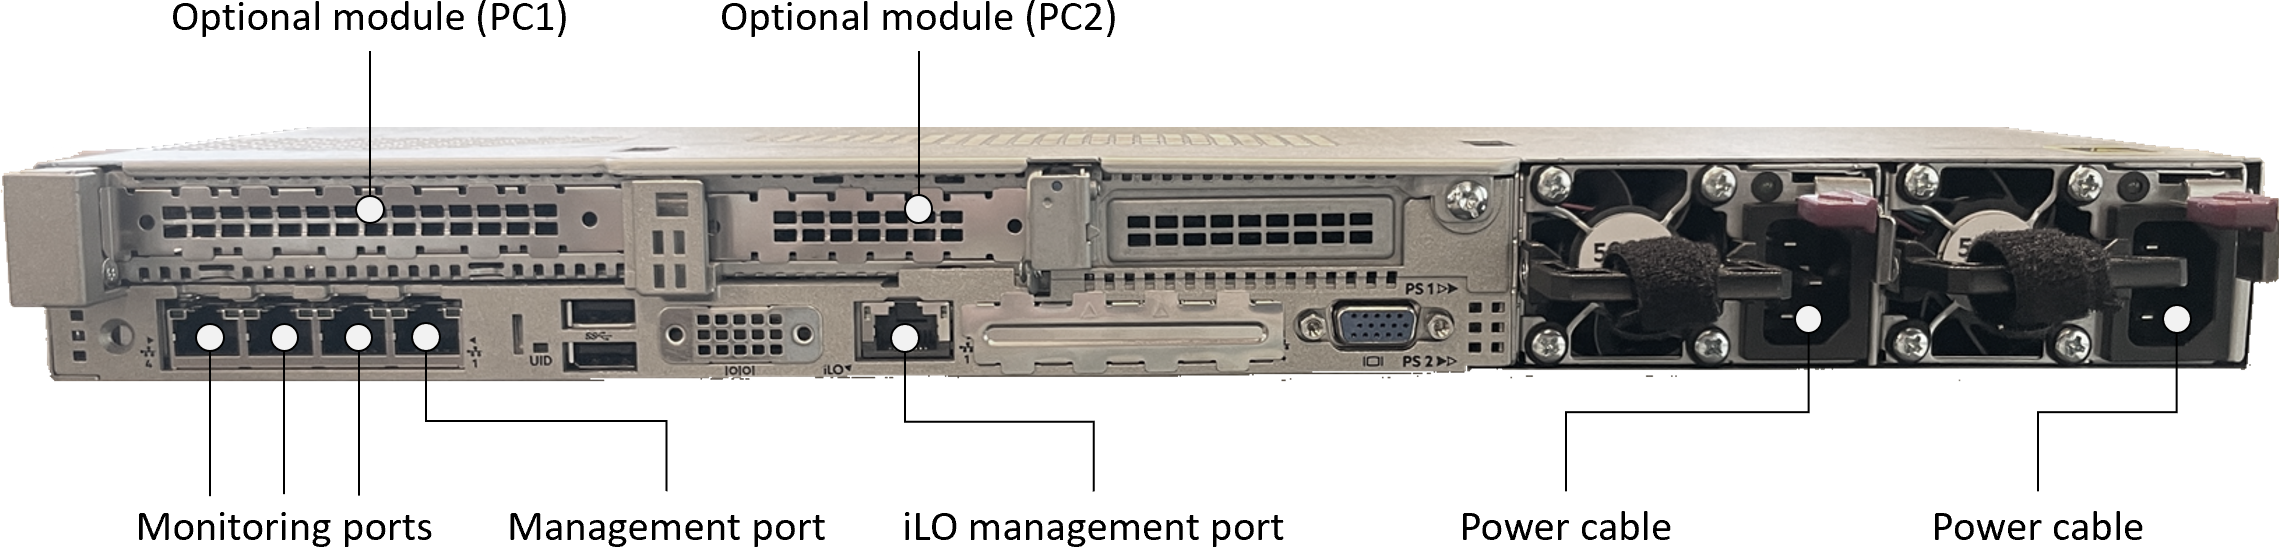 Photo of the HPE ProLiant DL360 back panel.